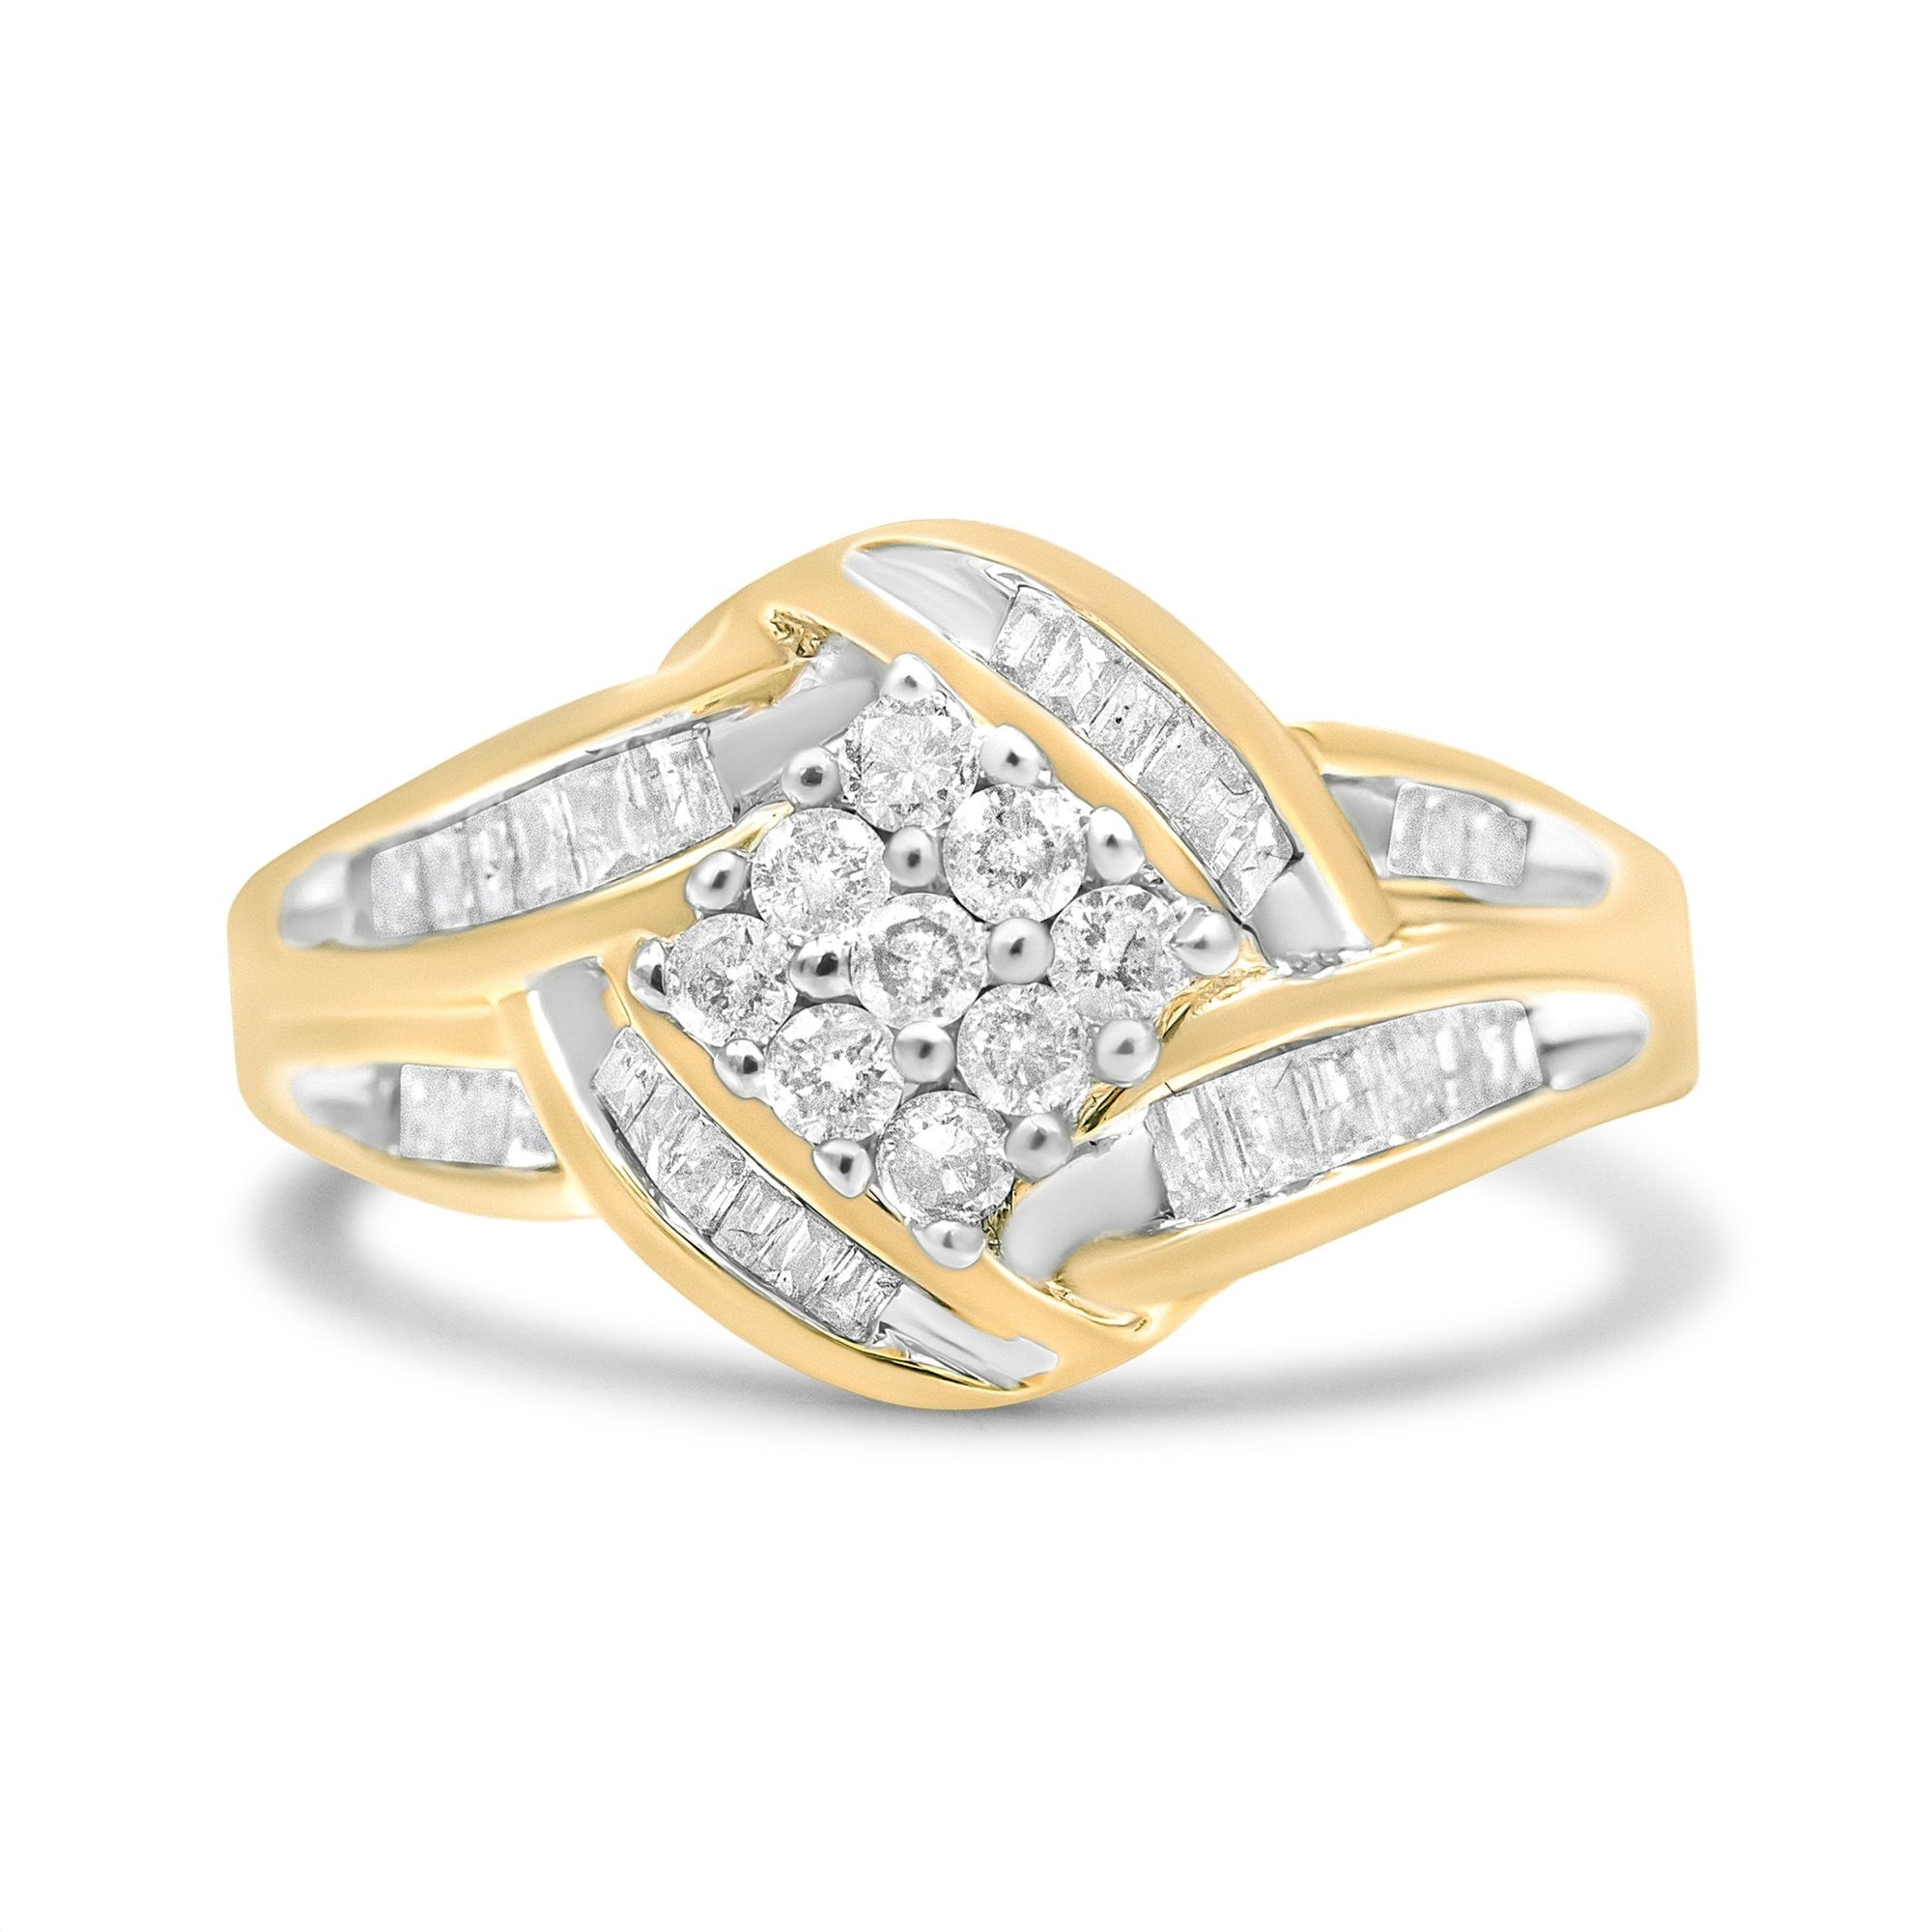 10K Yellow and White Gold 3/4 Cttw Diamond Cluster and Swirl Ring (H-I Color, I1-I2 Clarity) - LinkagejewelrydesignLinkagejewelrydesign